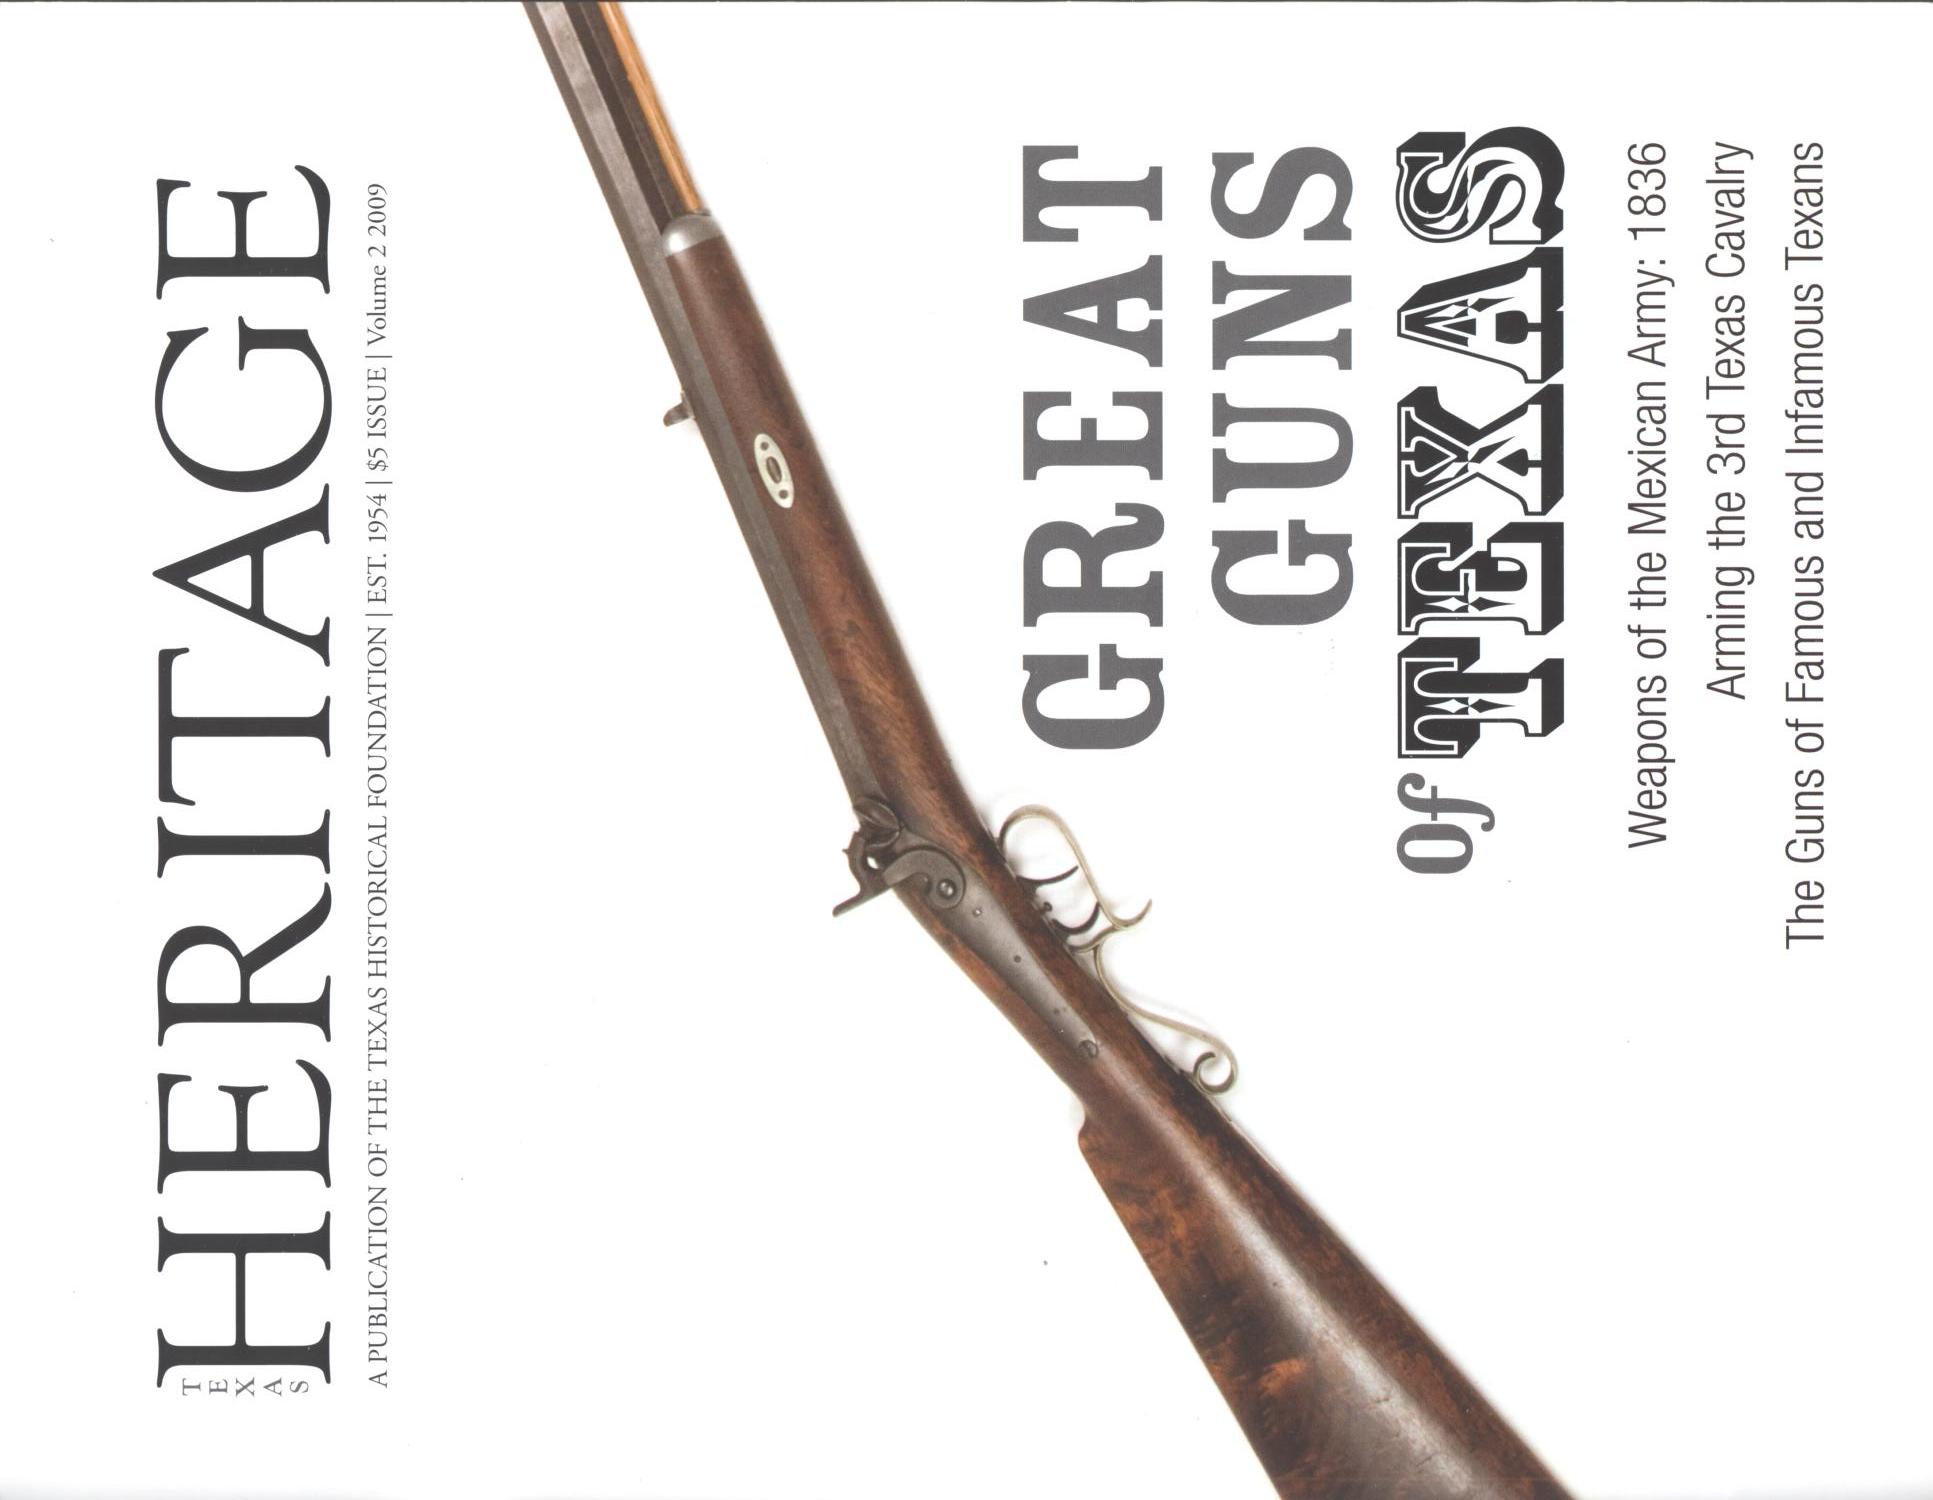 Heritage, 2009, Volume 2
                                                
                                                    Front Cover
                                                